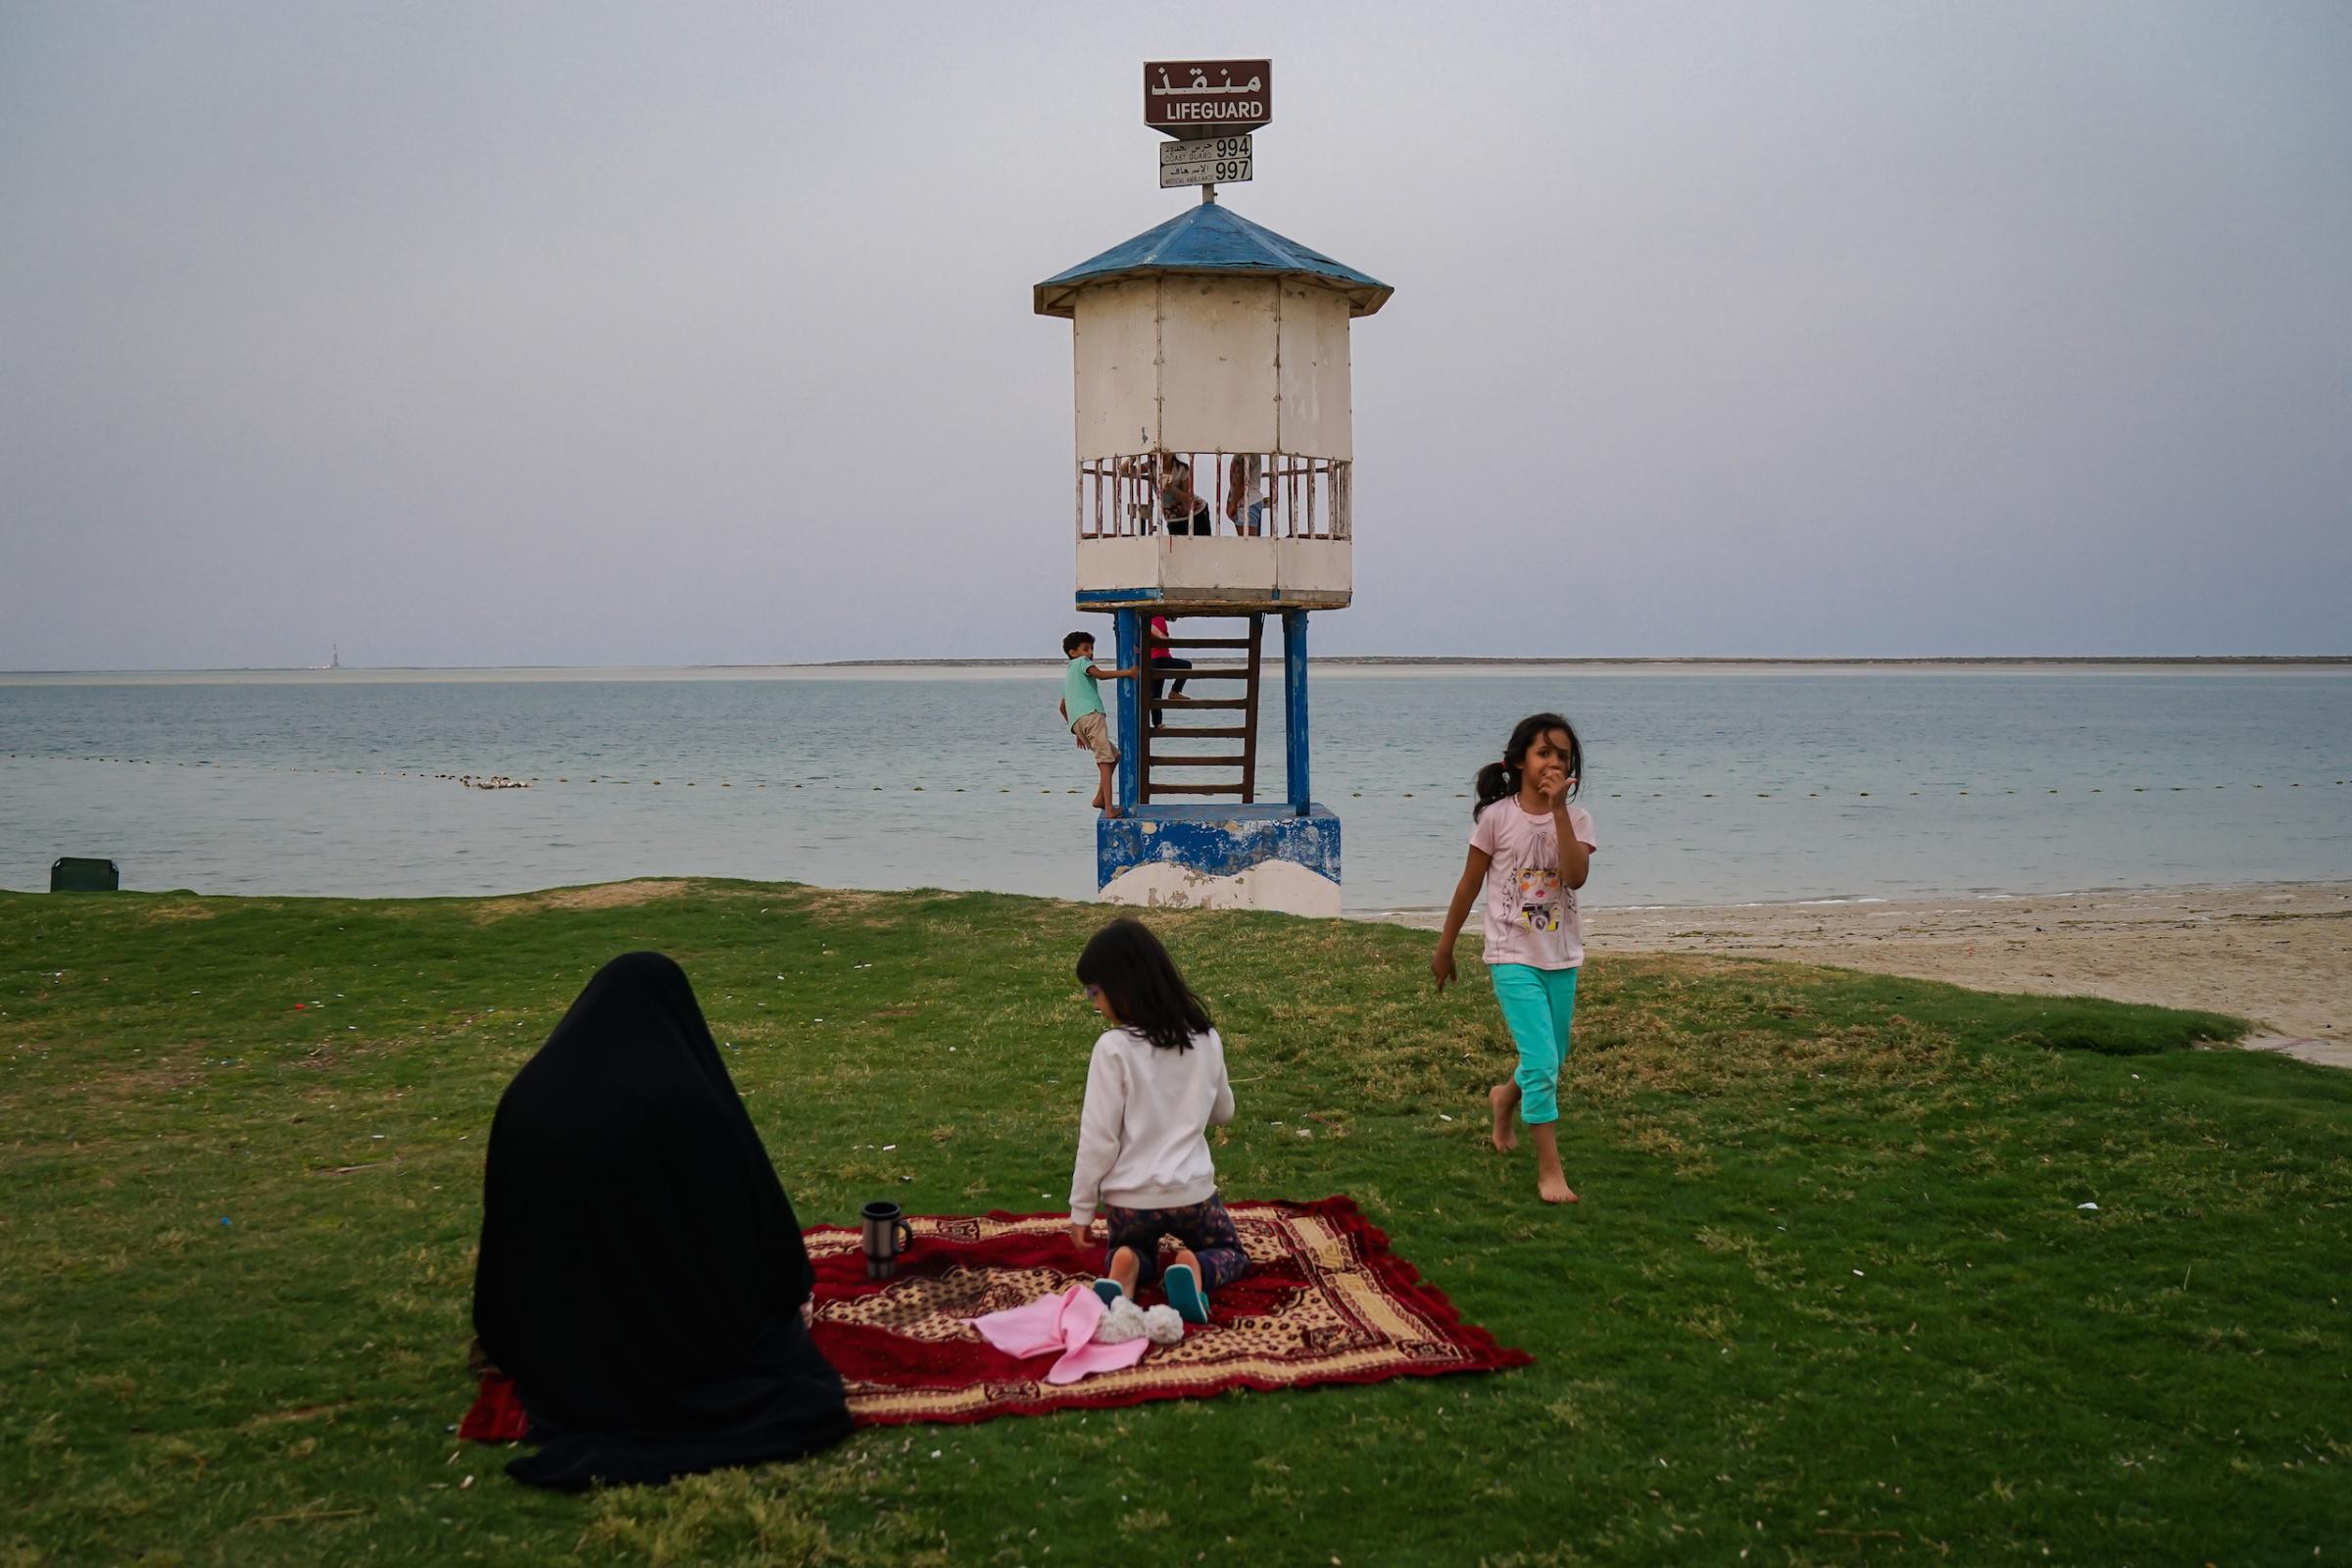 A six-year-old girl walks out of the lifeguard booth full of kids, but no lifeguard, in Jubail Industrial City, April 2016. "Why are you taking a picture?" she asked the photographer, who replied, "perhaps because these images preserve time?" Her father was standing nearby. The girl then said, "I will remember that I can't swim here, but my brother can," before returning to play with other children.